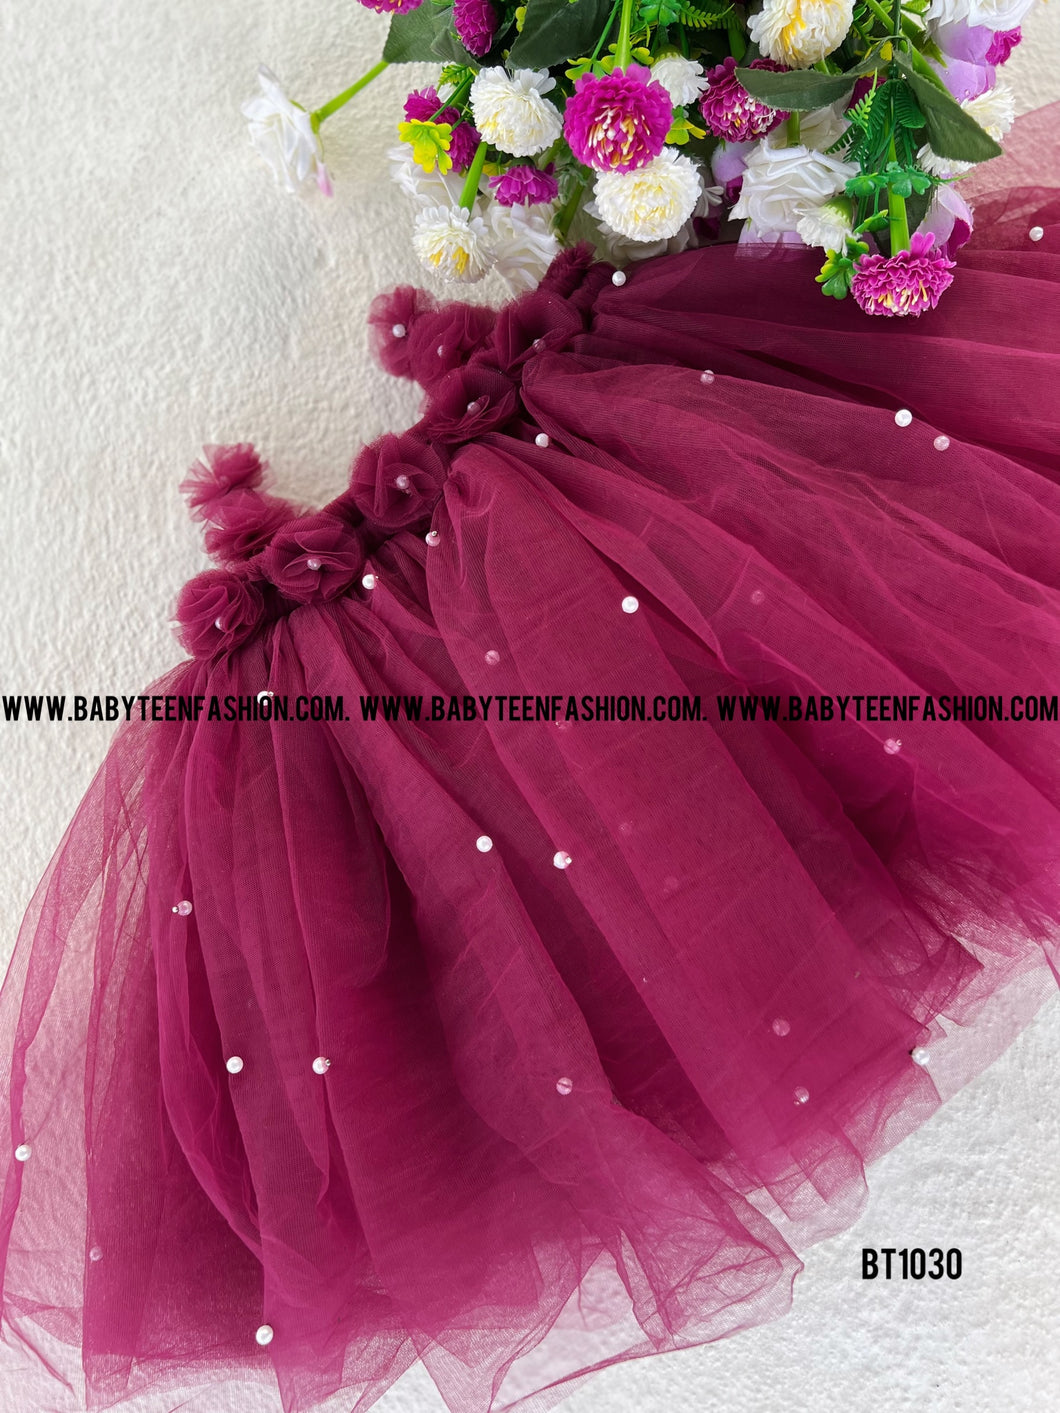 BT1030 Party Wear Frock with Pearl Embellishment and Handmade Flowers